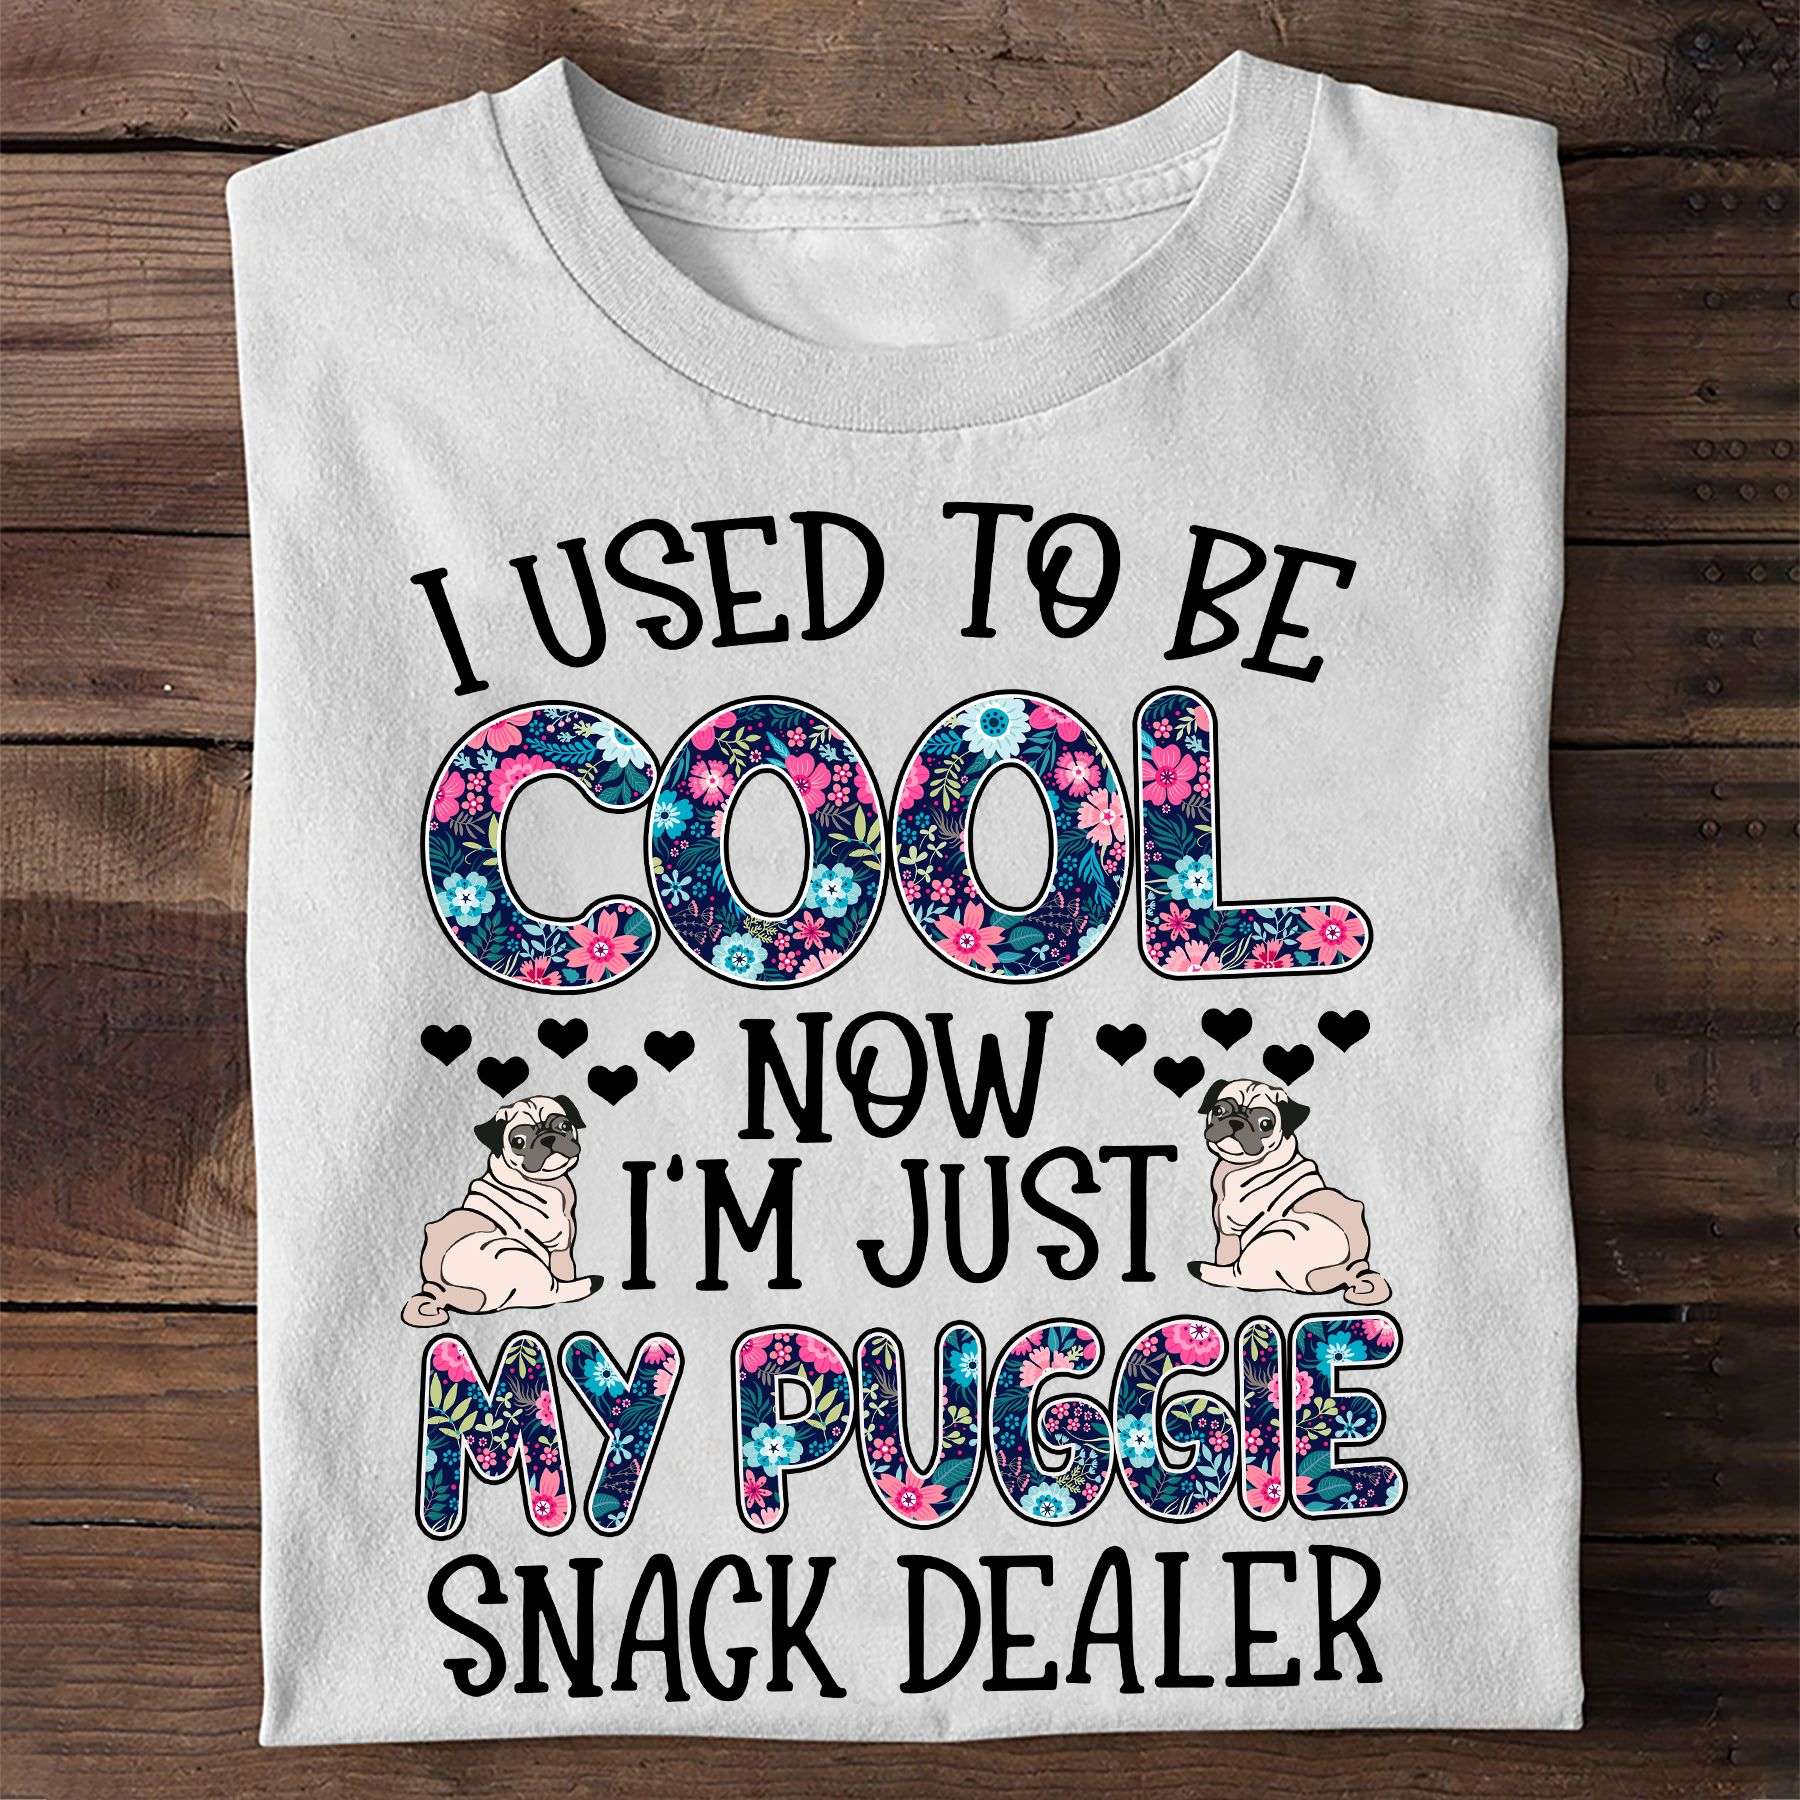 Pug Dog - I used to be cool now i'm just my puggie snack dealer